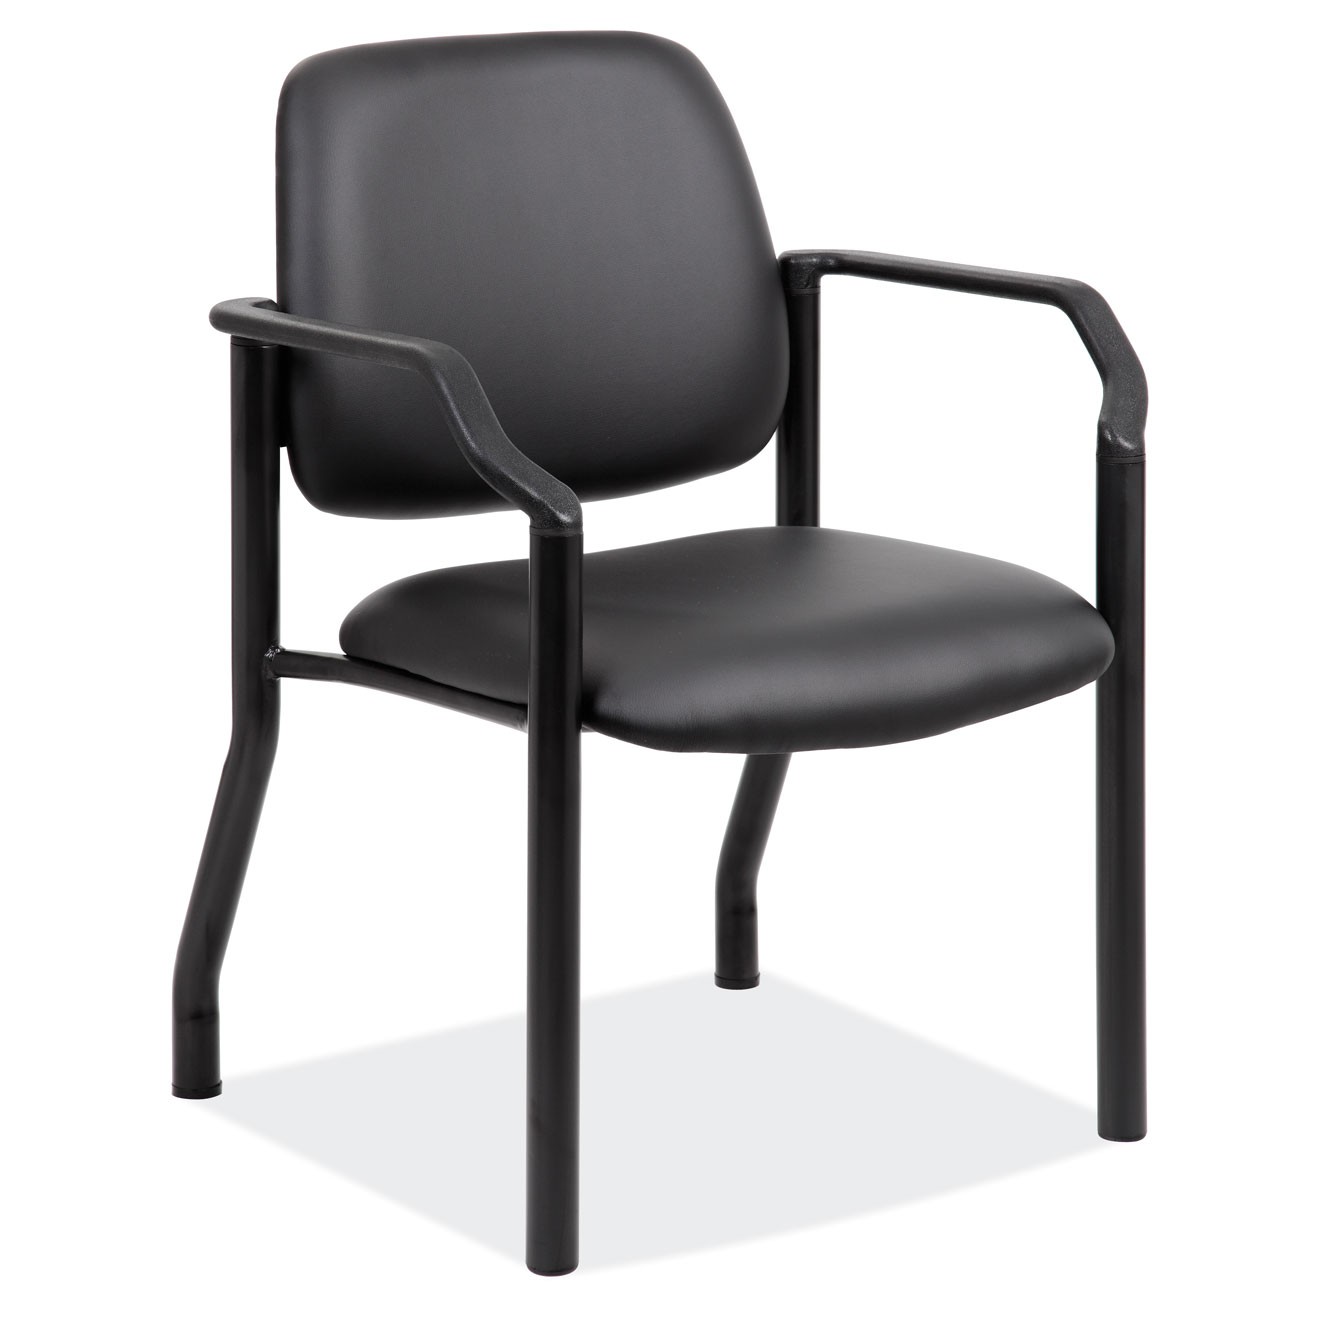 FP215+BLACK+ANTIMICROBIAL+GUESS+CHAIR+W%2FARMS%2C+UP+TO+300LB+CAPACITY